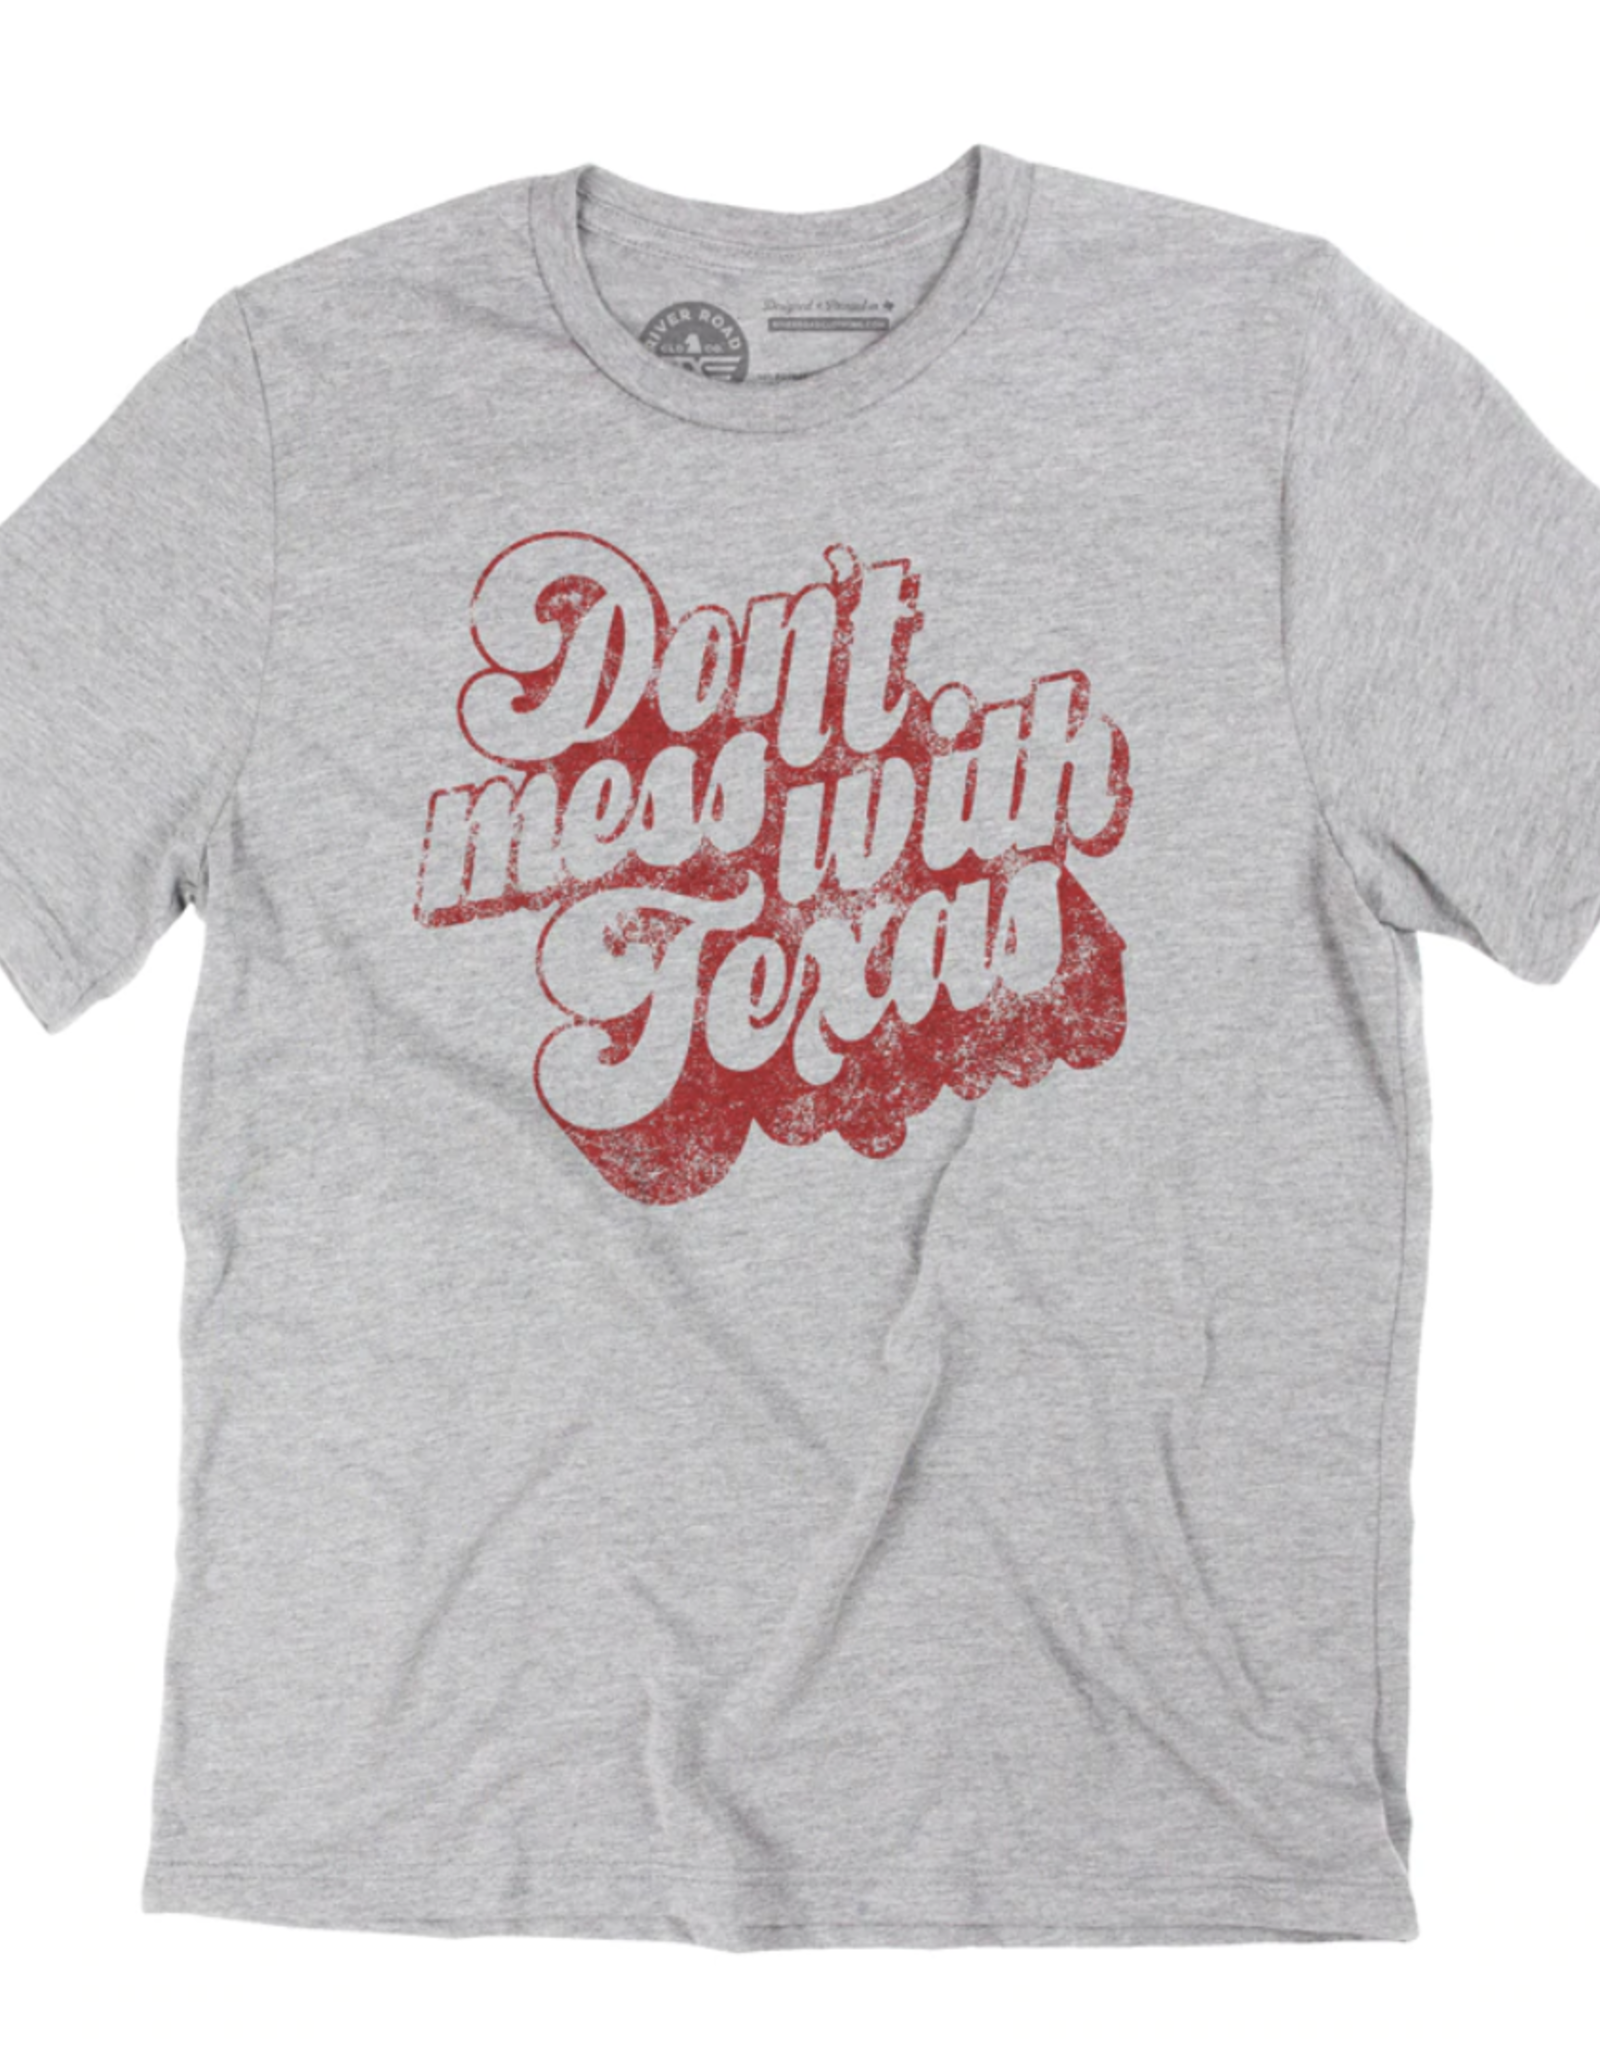 River Road Clothing don't mess with texas tee